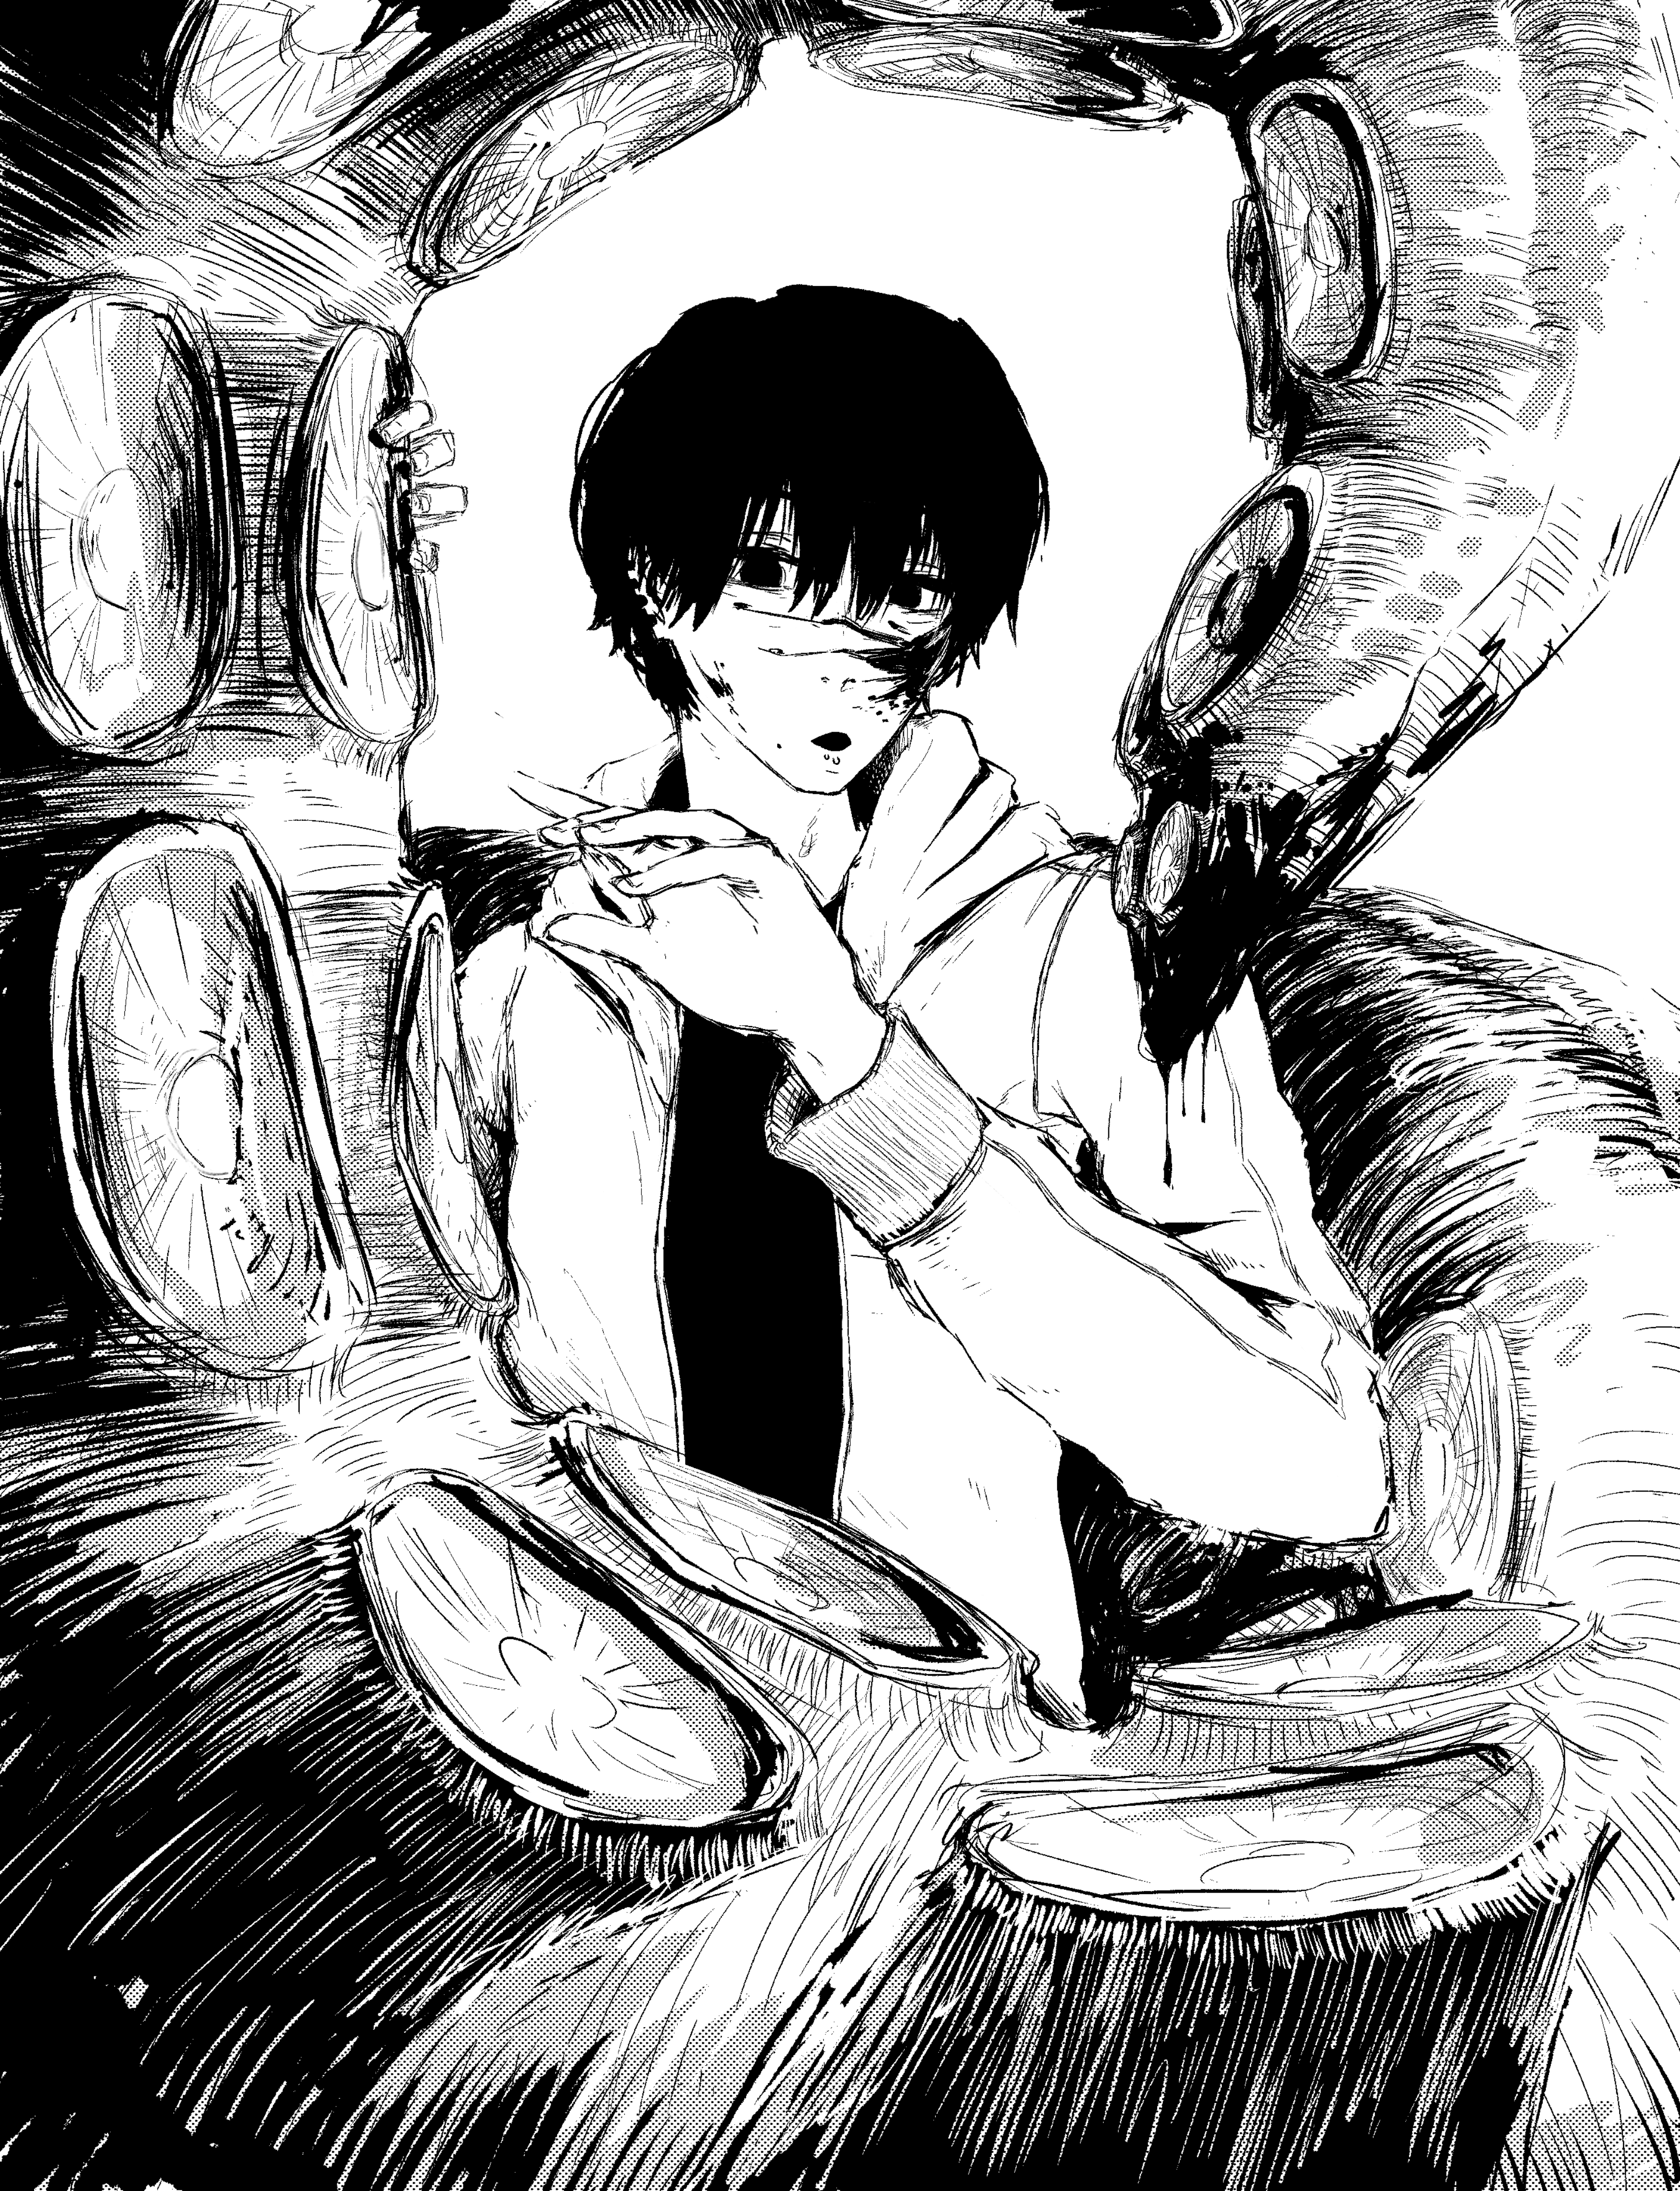 yoshida from chainsaw man with blood on his cheek, holding onto his tentacle as it wraps around him